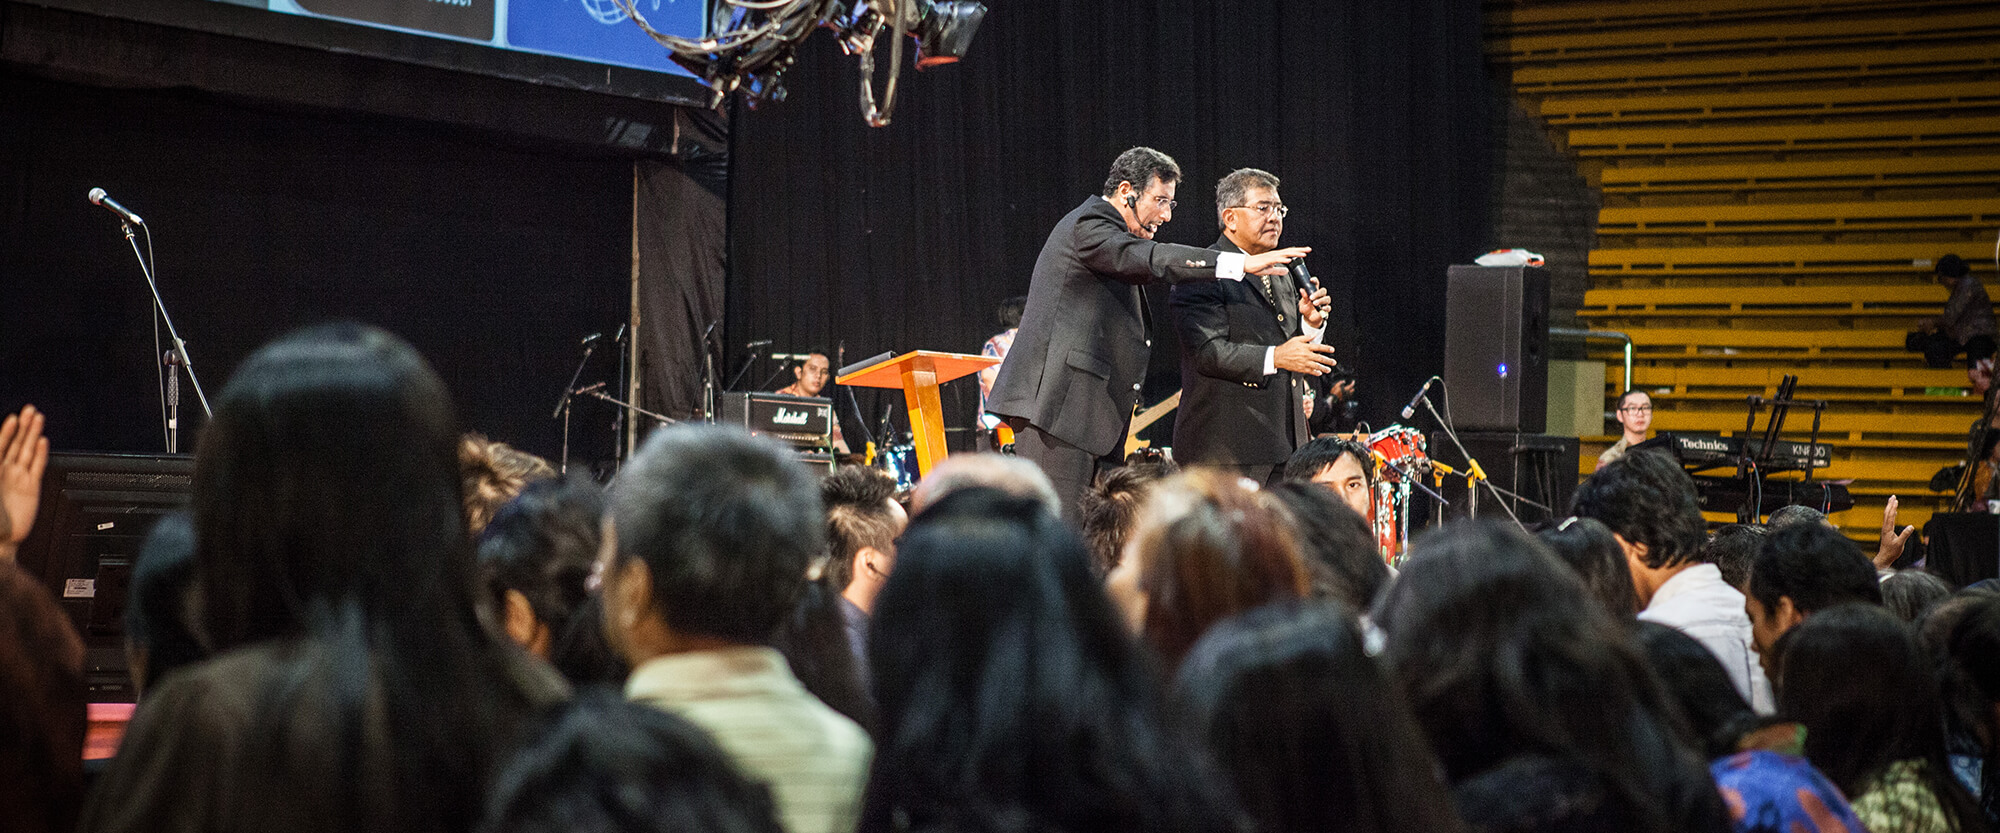 Michael Youssef Preaching in Indonesia